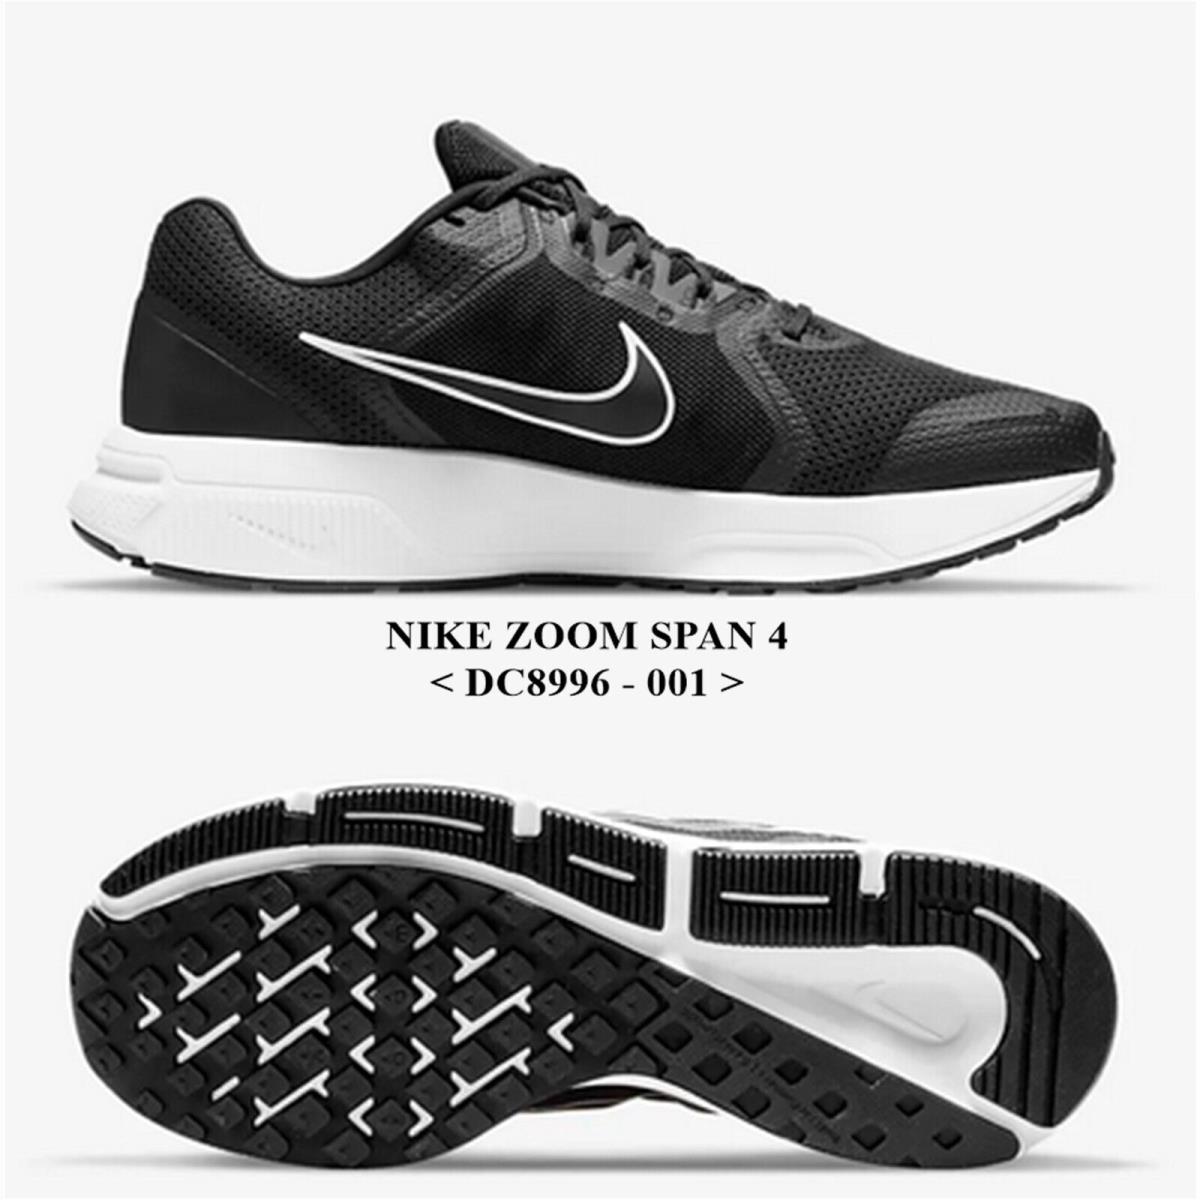 Nike Zoom Span 4 DC8996 -001 Men`s Running Shoes.new with Box NO Lid